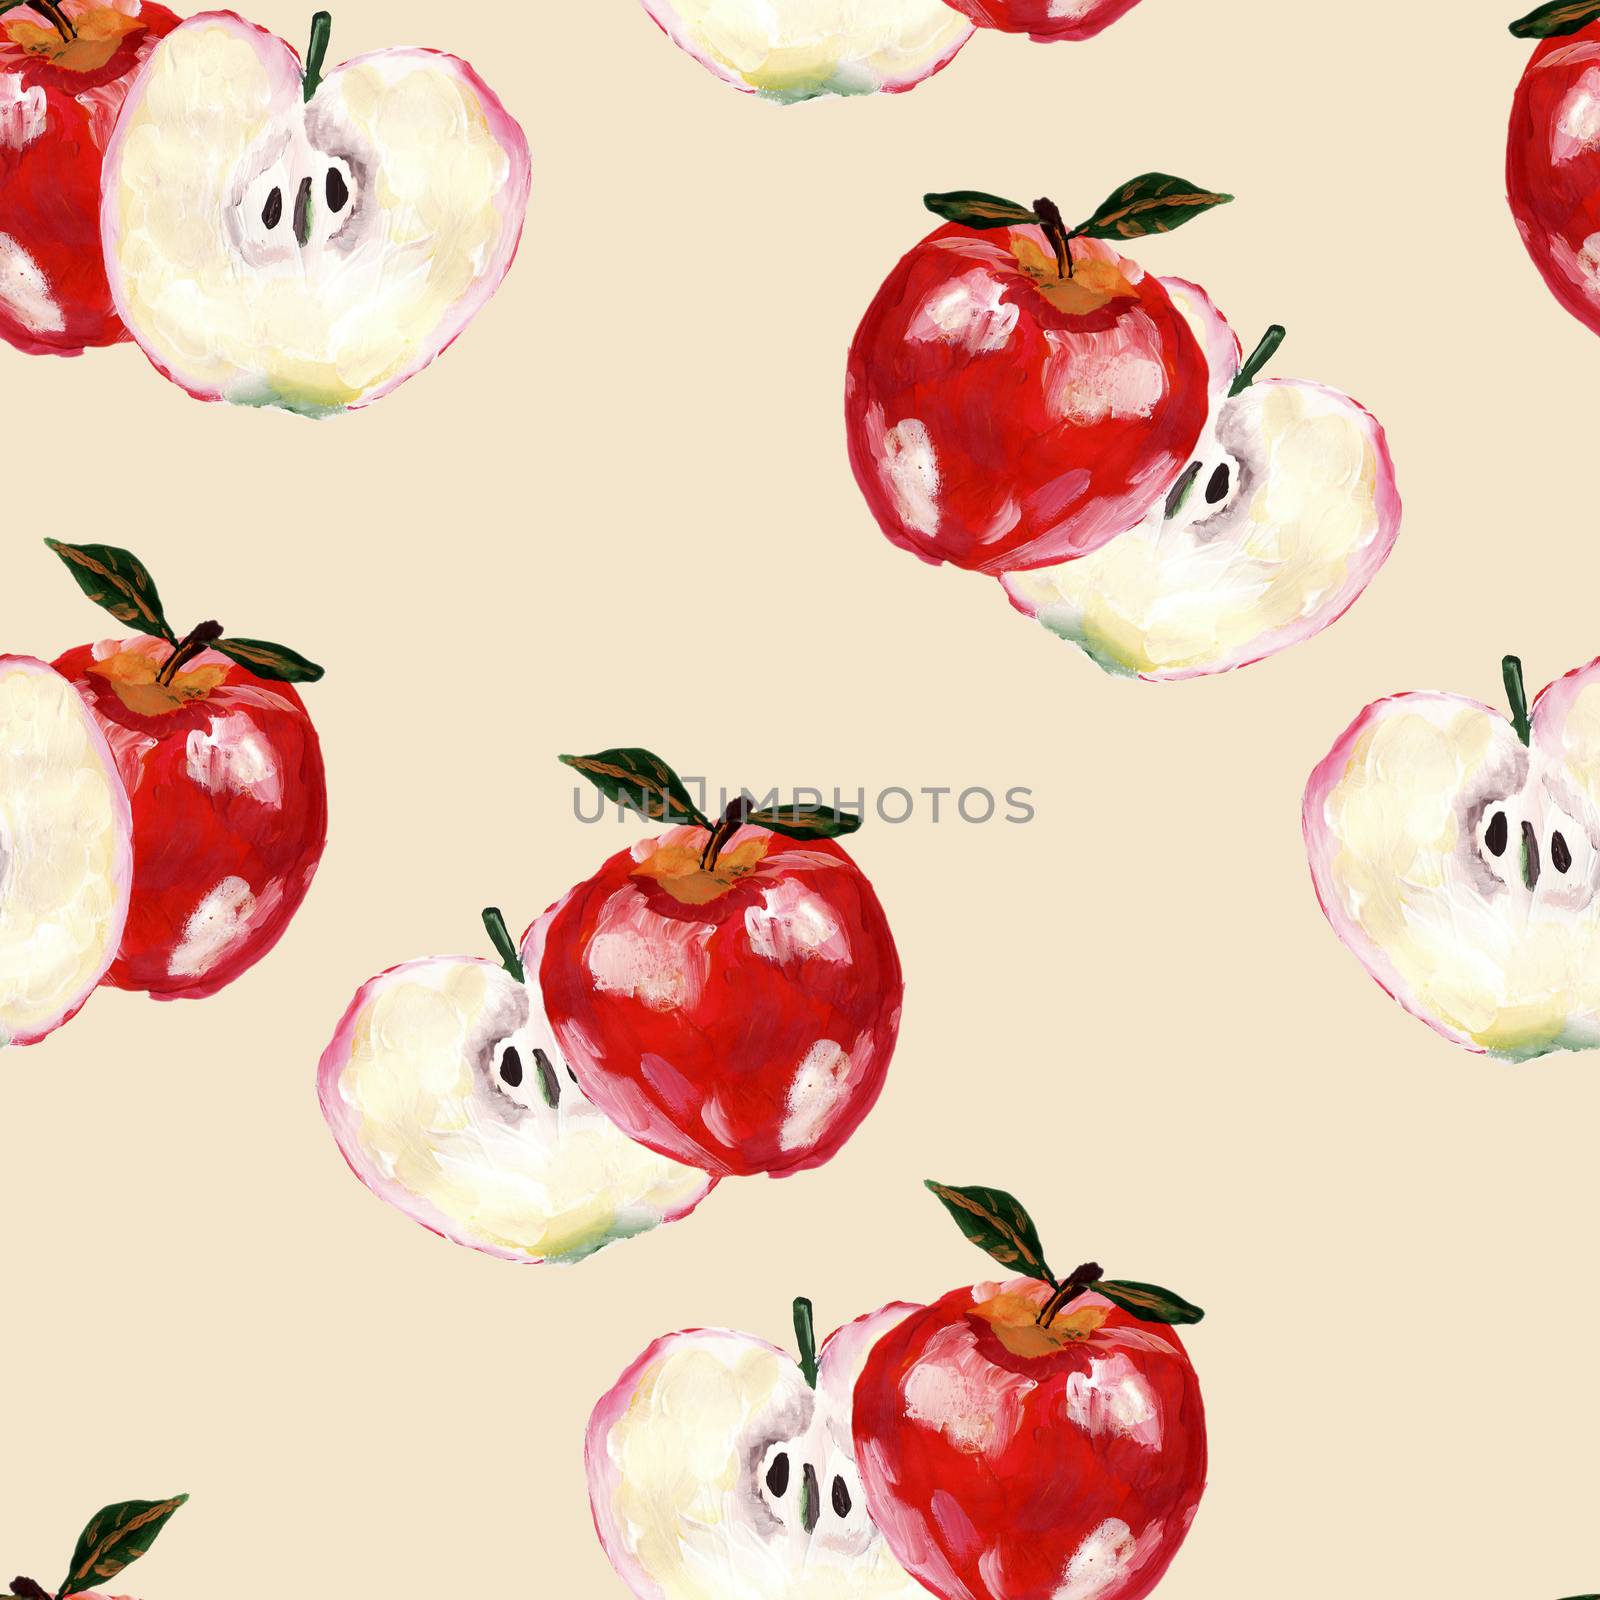 Hand drawn seamless pattern with red apples and slices of apples. Repeated apple and leaves fruit background for design, fabric, print, textile, textile, wallpaper, posters.